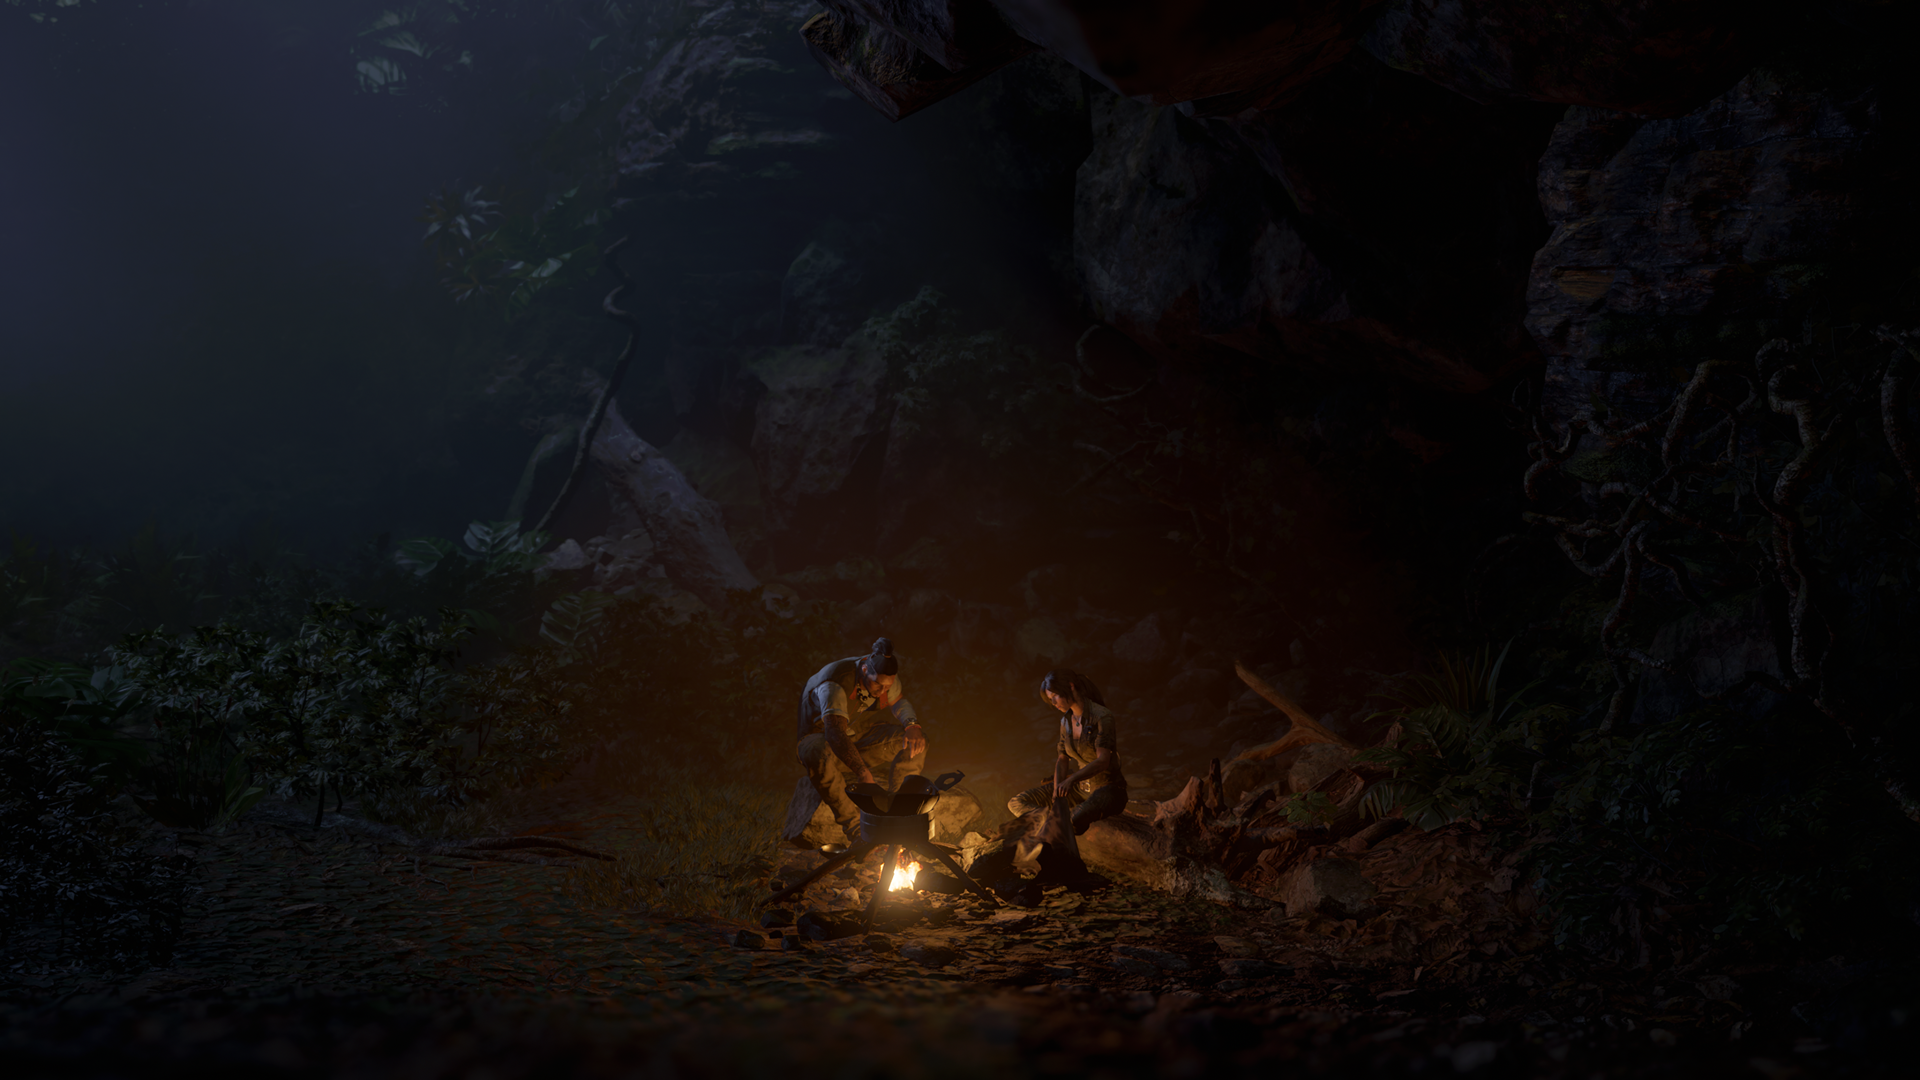 Shadow of the Tomb Raider 2019-12-30 09-50-07.png